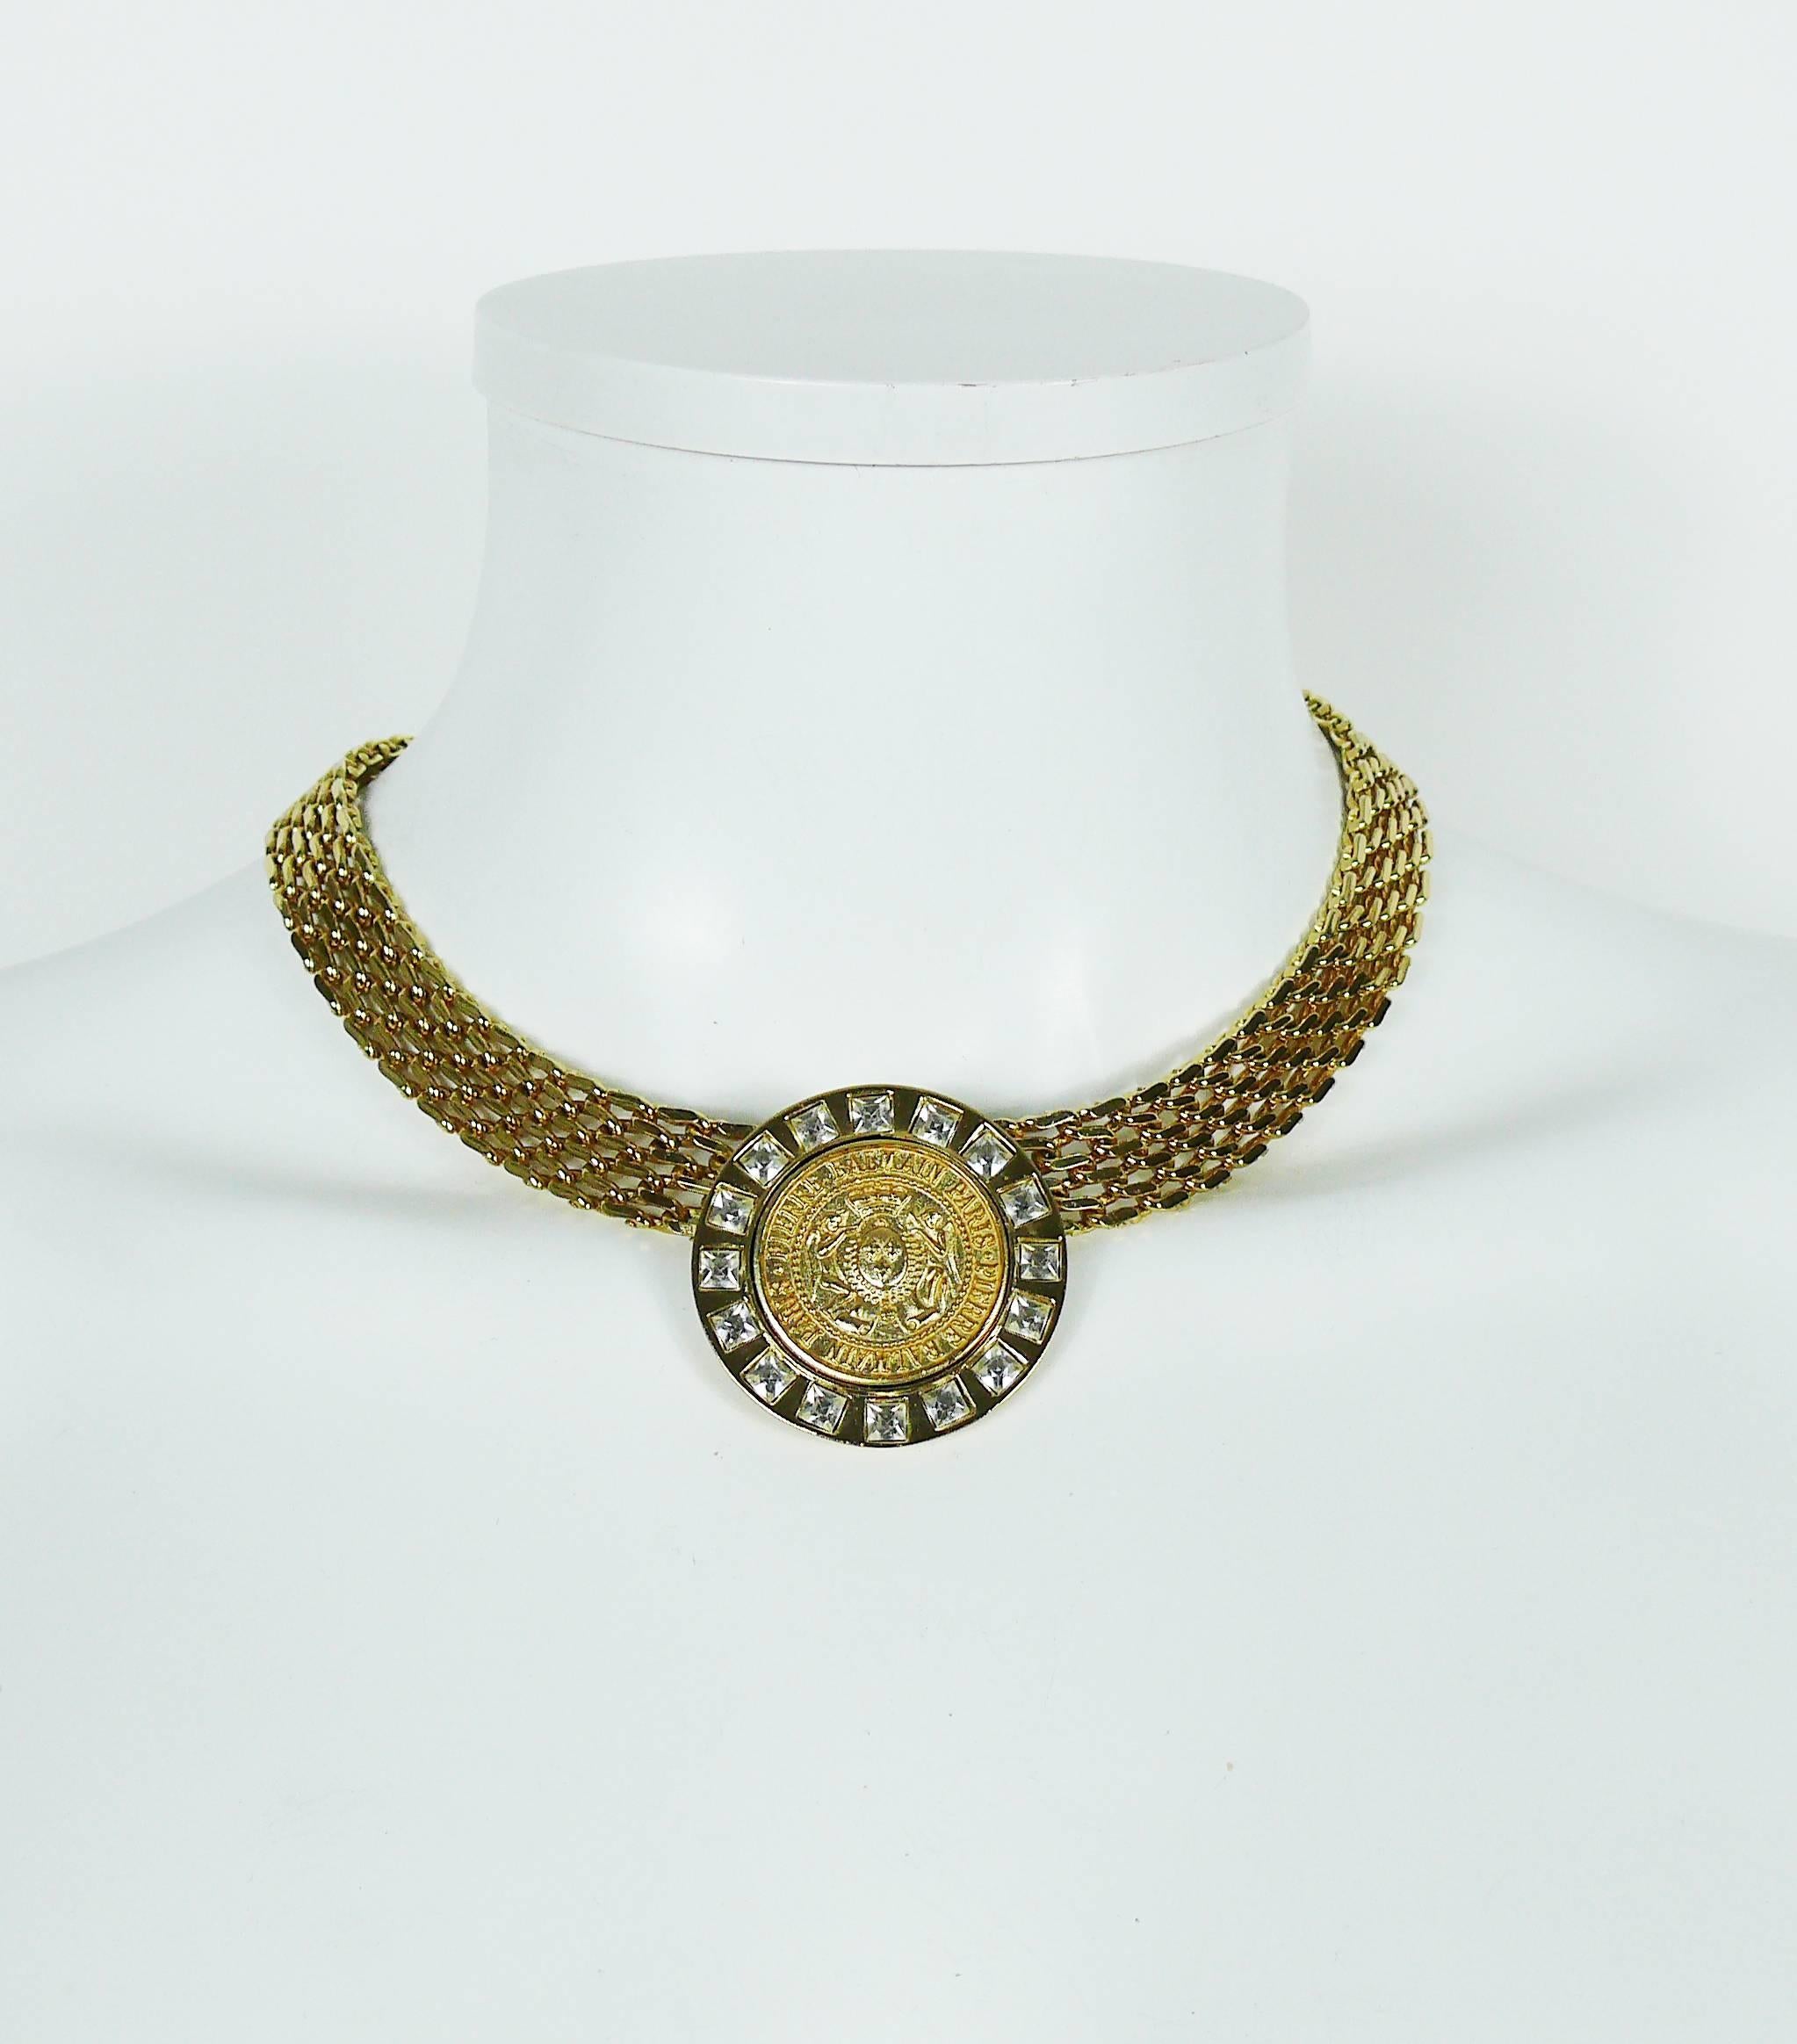 PIERRE BALMAIN vintage gold toned necklace featuring a PIERRE BALMAIN medallion crest at center embellished with clear crystals.

Secure clasp closure.

Embossed PB Paris.

Indicative measurements : length approx. 42.5 cm (16.73 inches) / chain